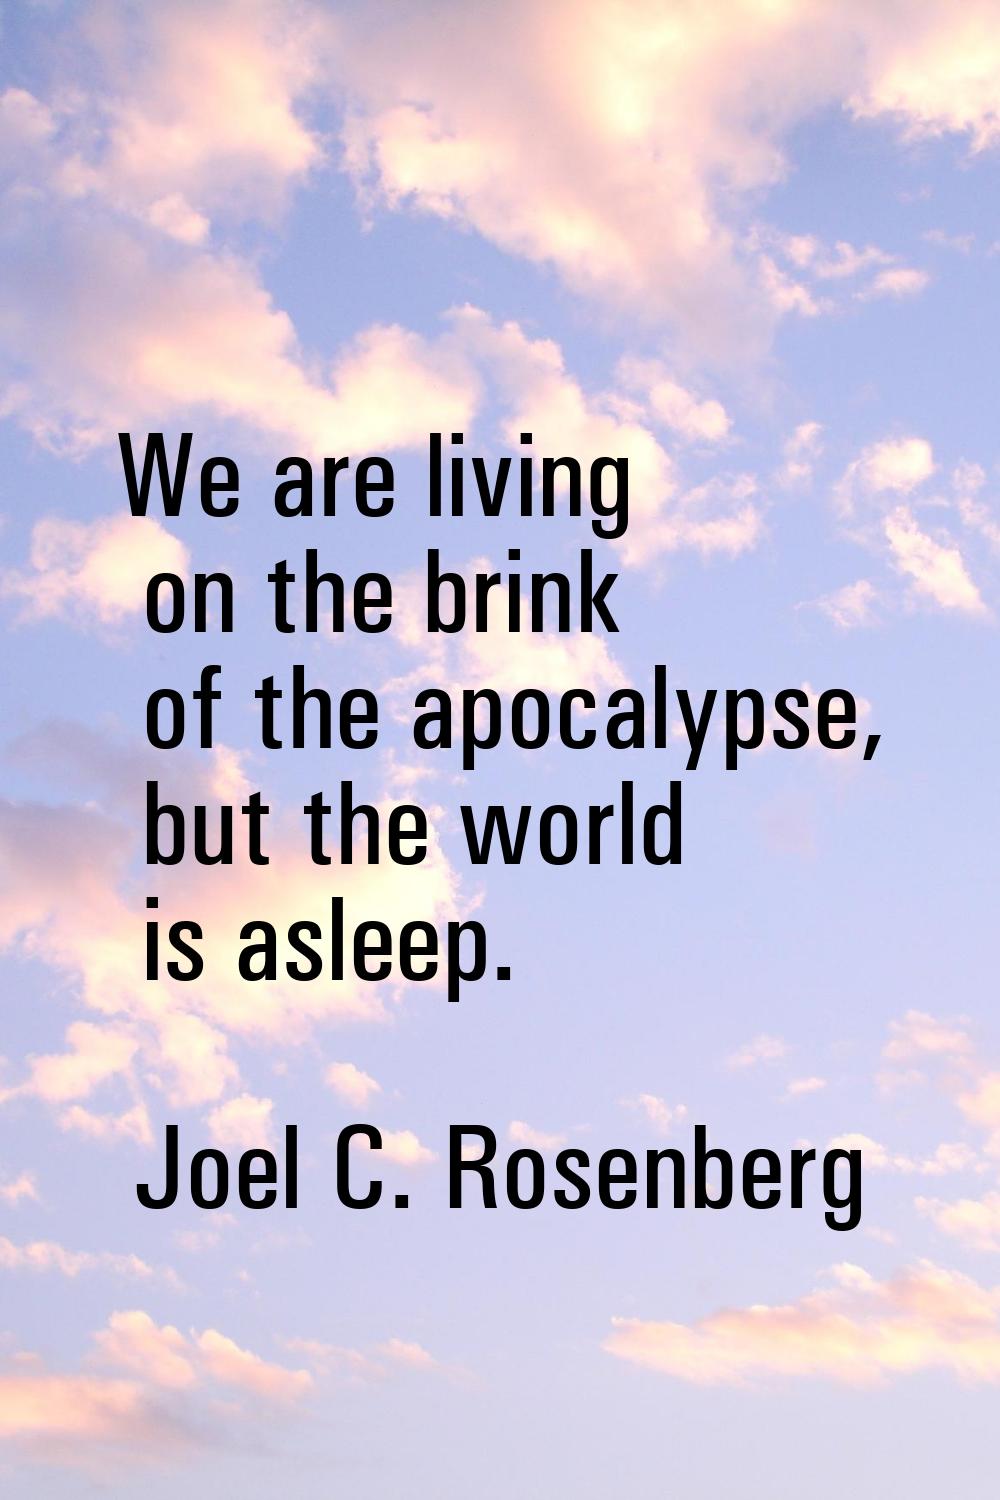 We are living on the brink of the apocalypse, but the world is asleep.